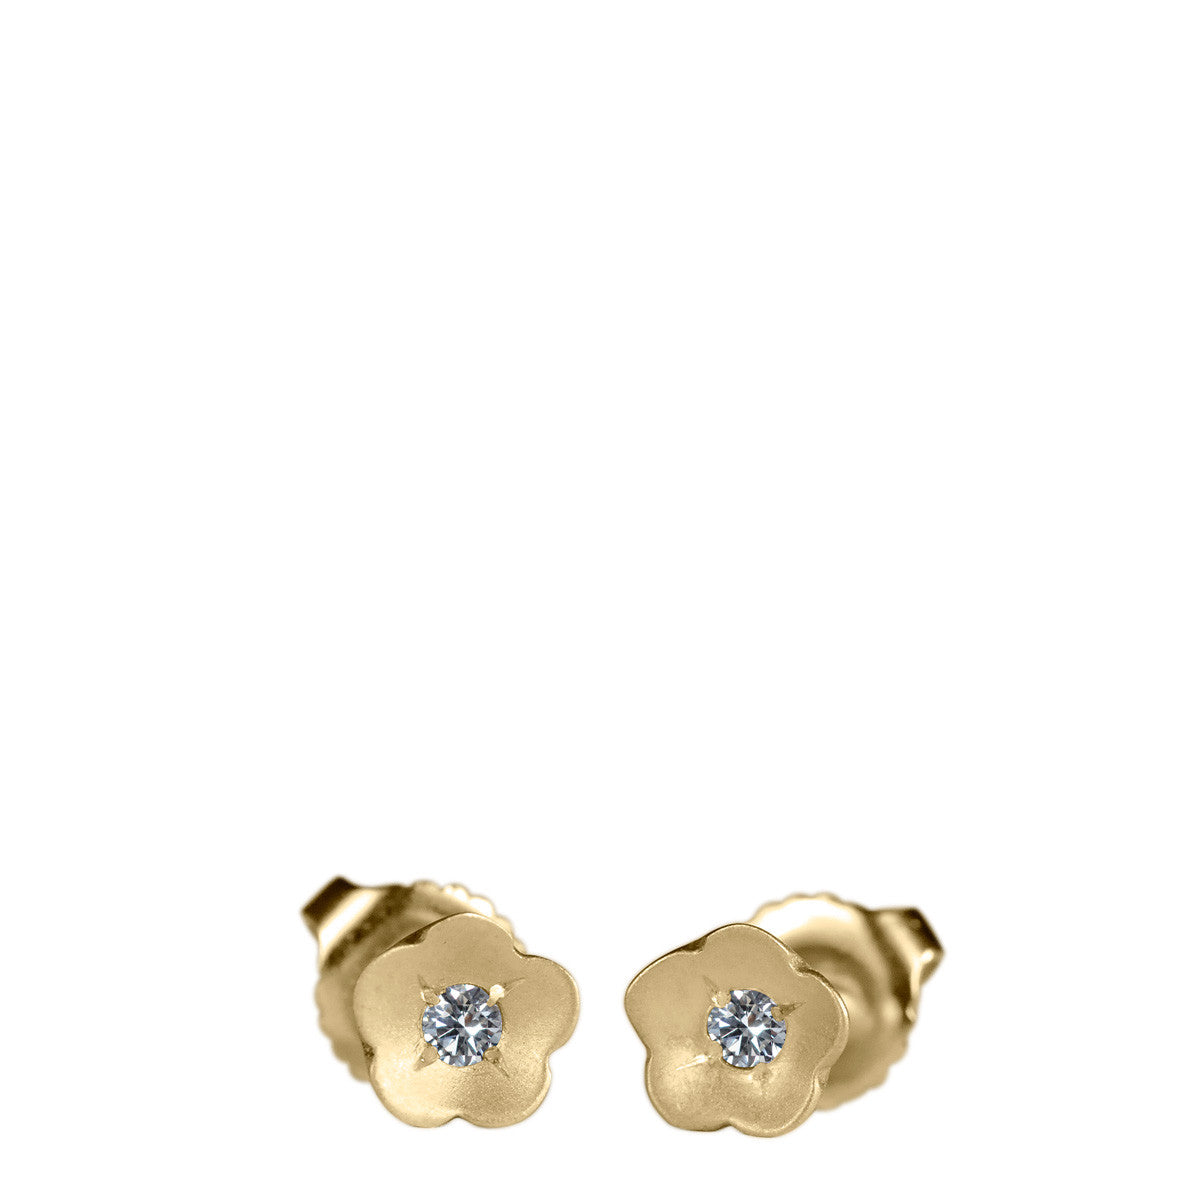 Marigold Brushed Gold Flower Statement Earrings – The Dainty Doe